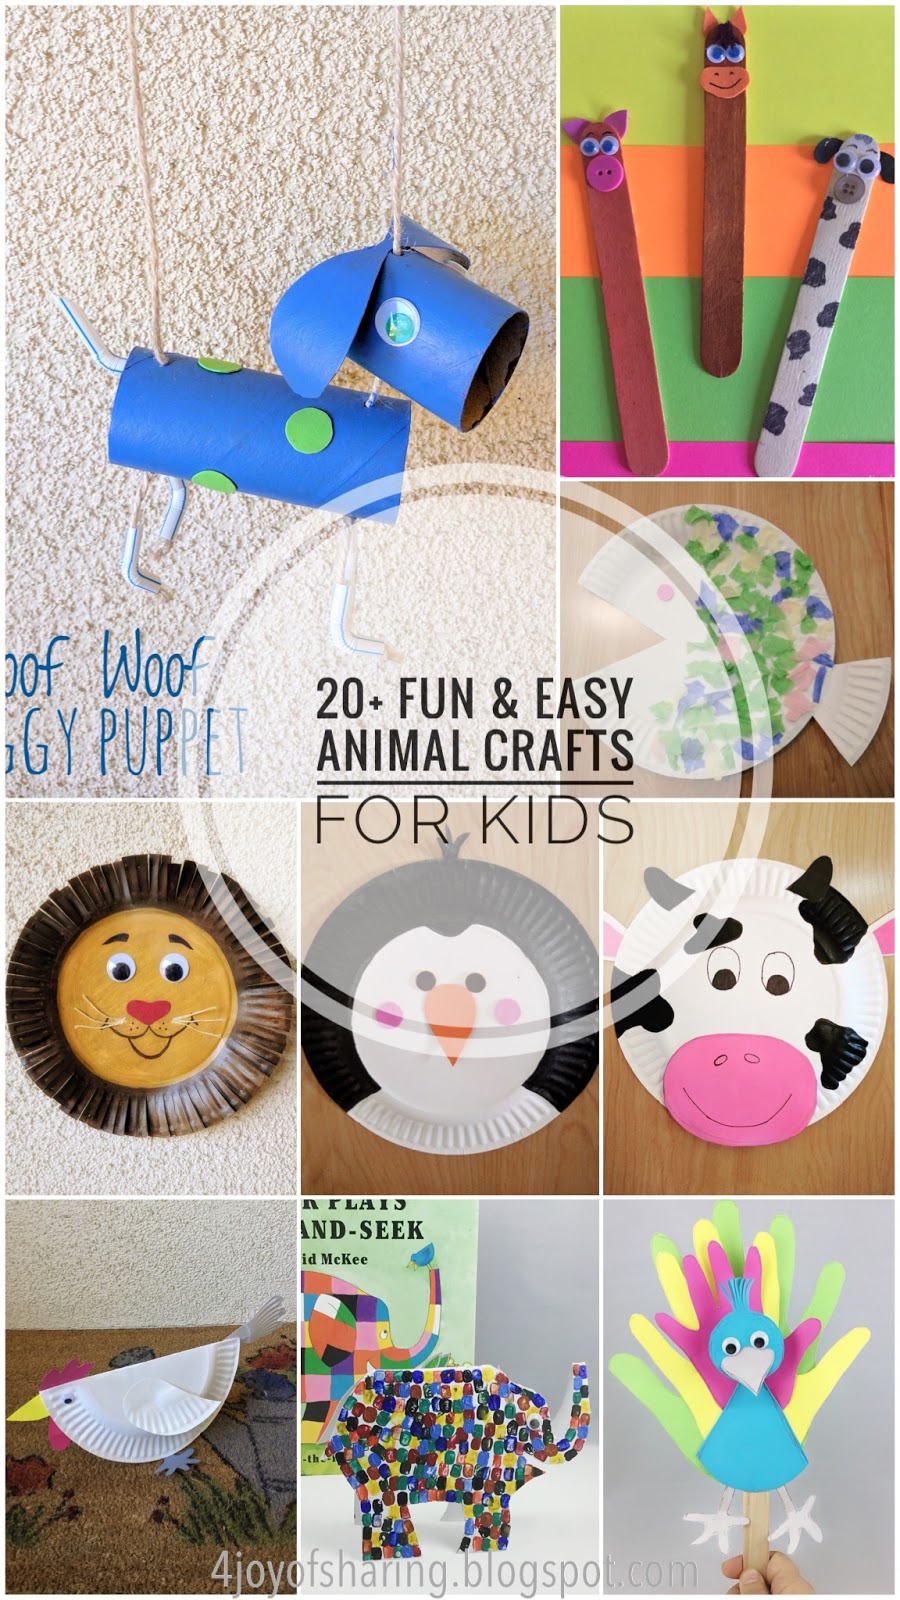 20+ Fun and Easy Animal Crafts For Kids - The Joy of Sharing